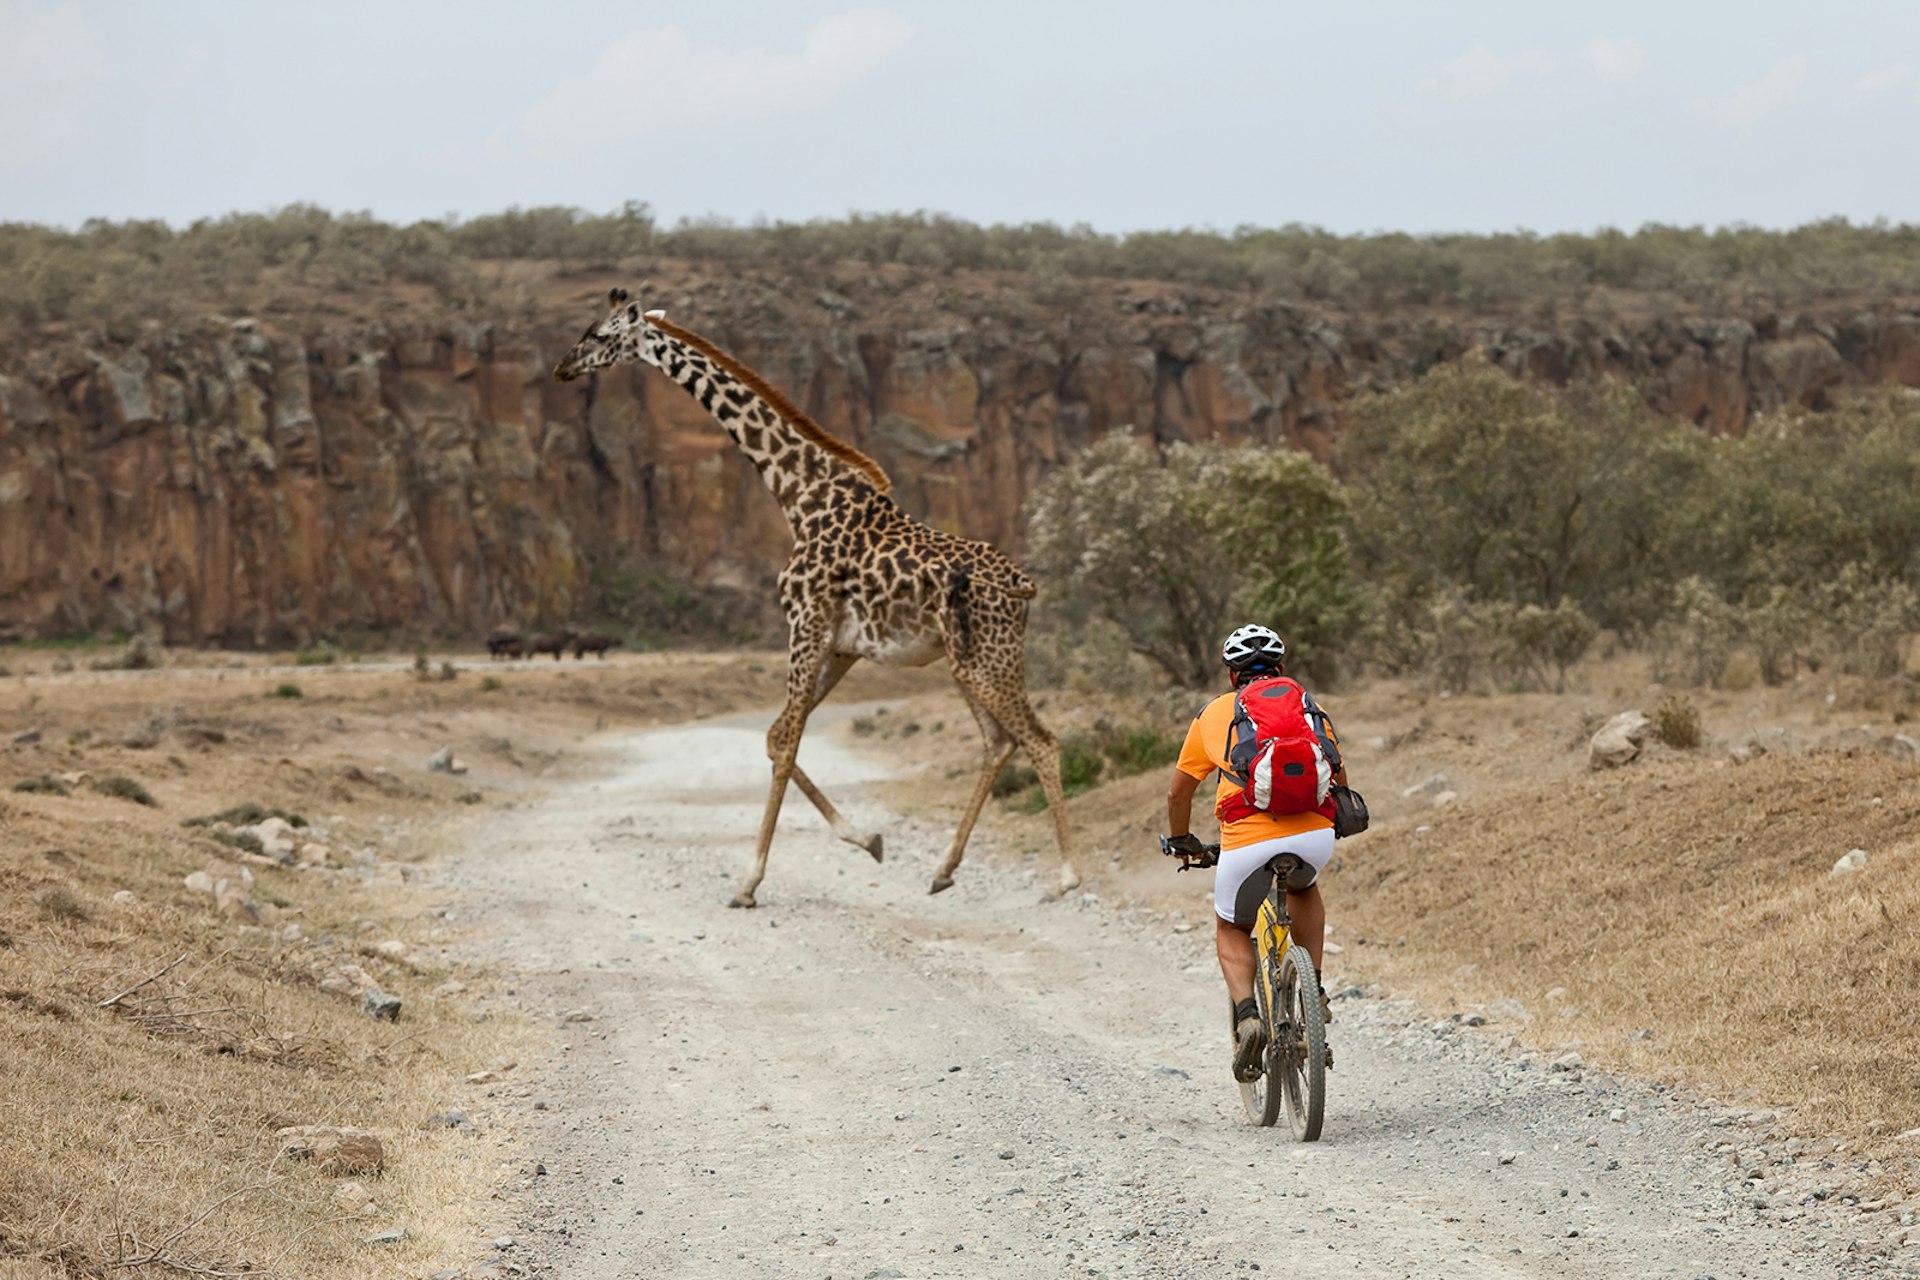 Giraffe crossing a path in front of a man on a mountain bike at Hell's Gate National Park in Kenya